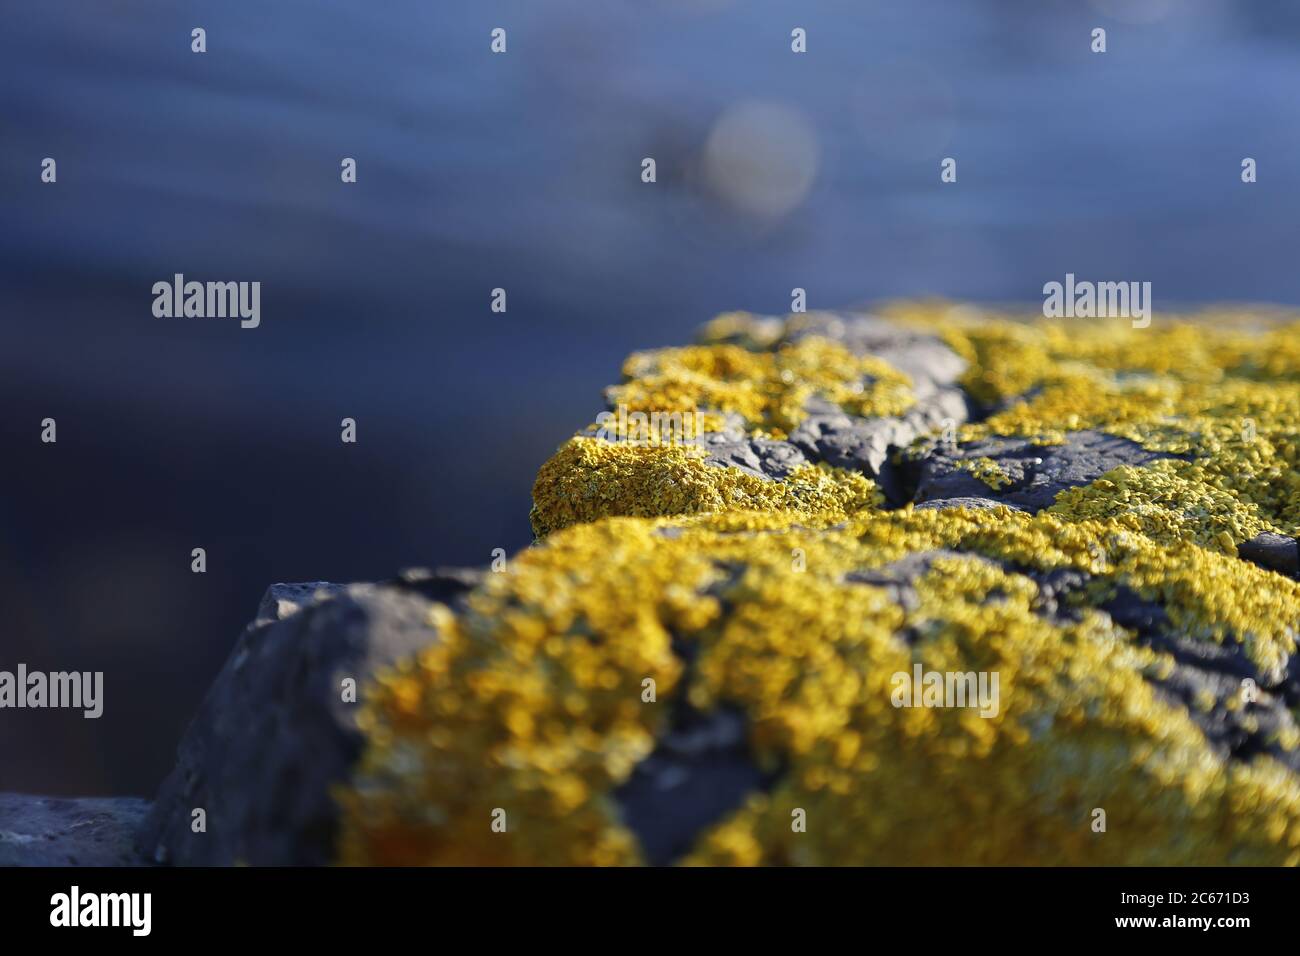 CloseUp photo Stones and Rocks on a seashore covered with yellow moss with blue sea background Stock Photo